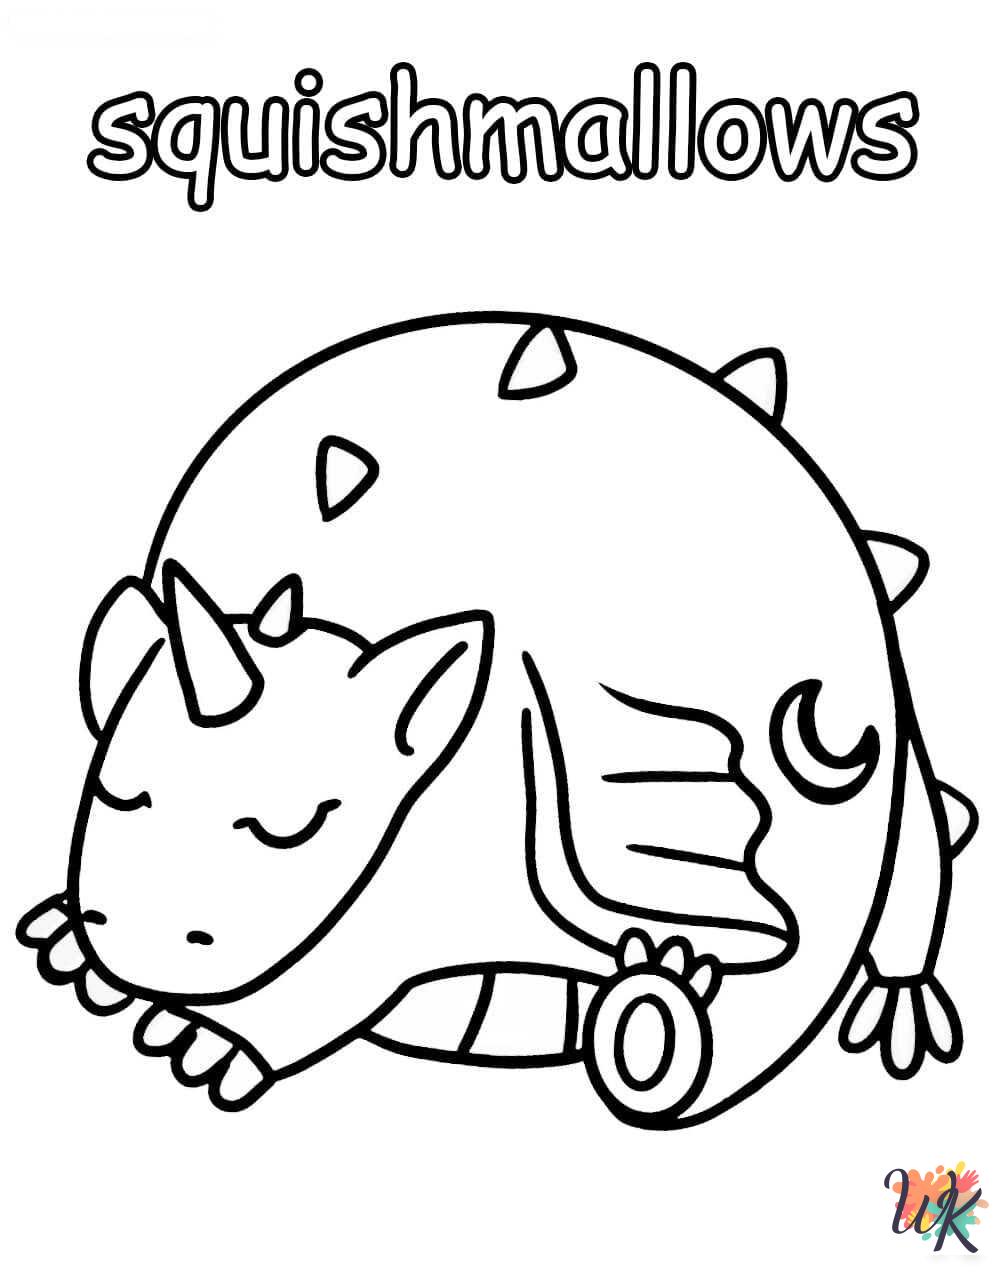 Squishmallows coloring pages for preschoolers 1